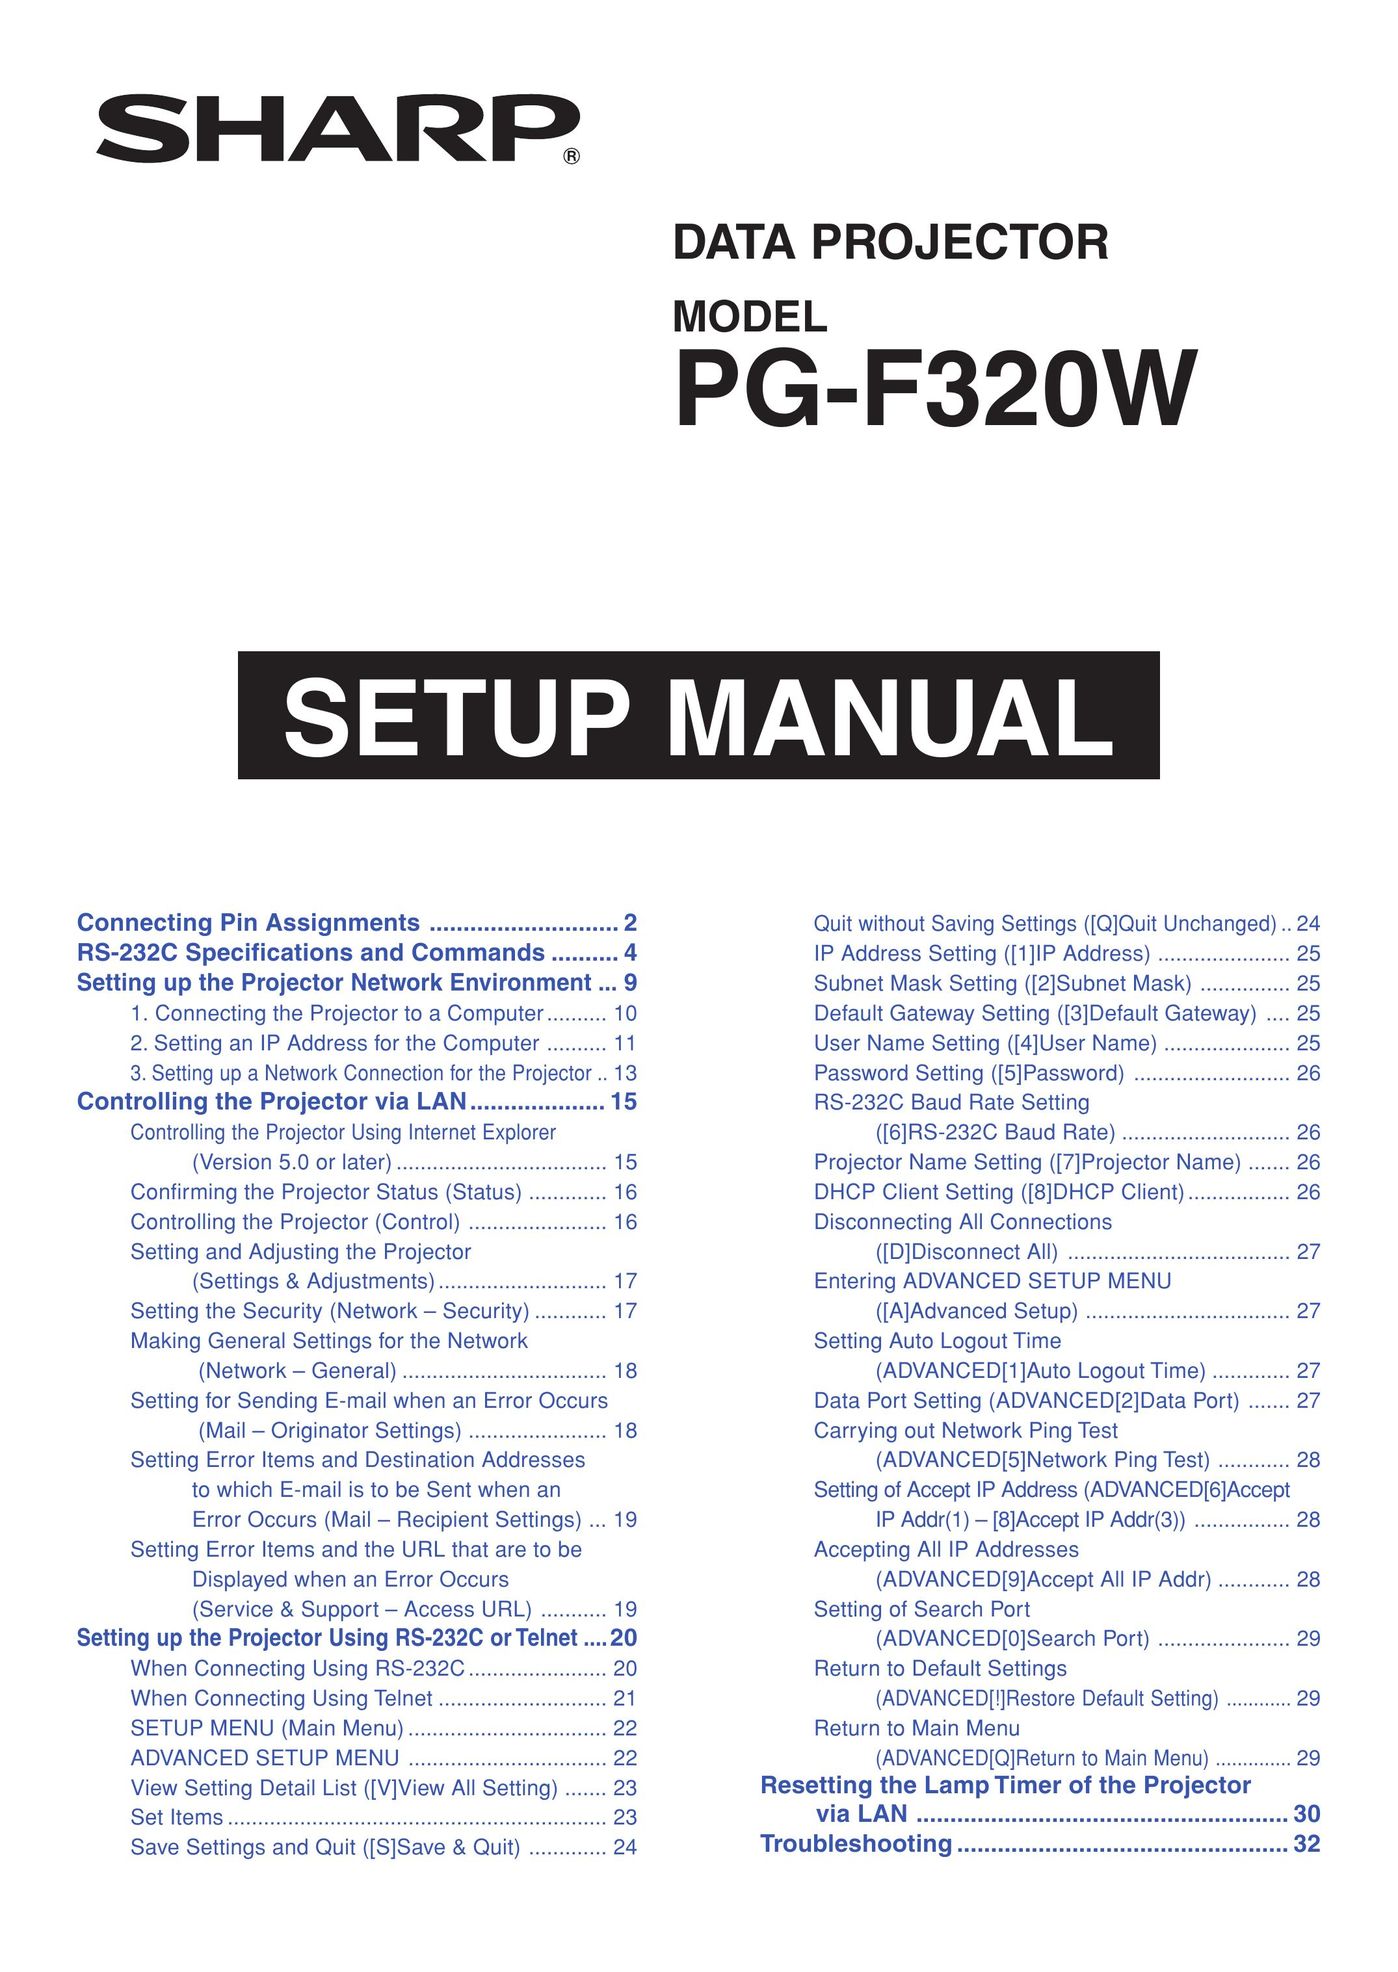 Sharp PG-F320W Home Theater System User Manual